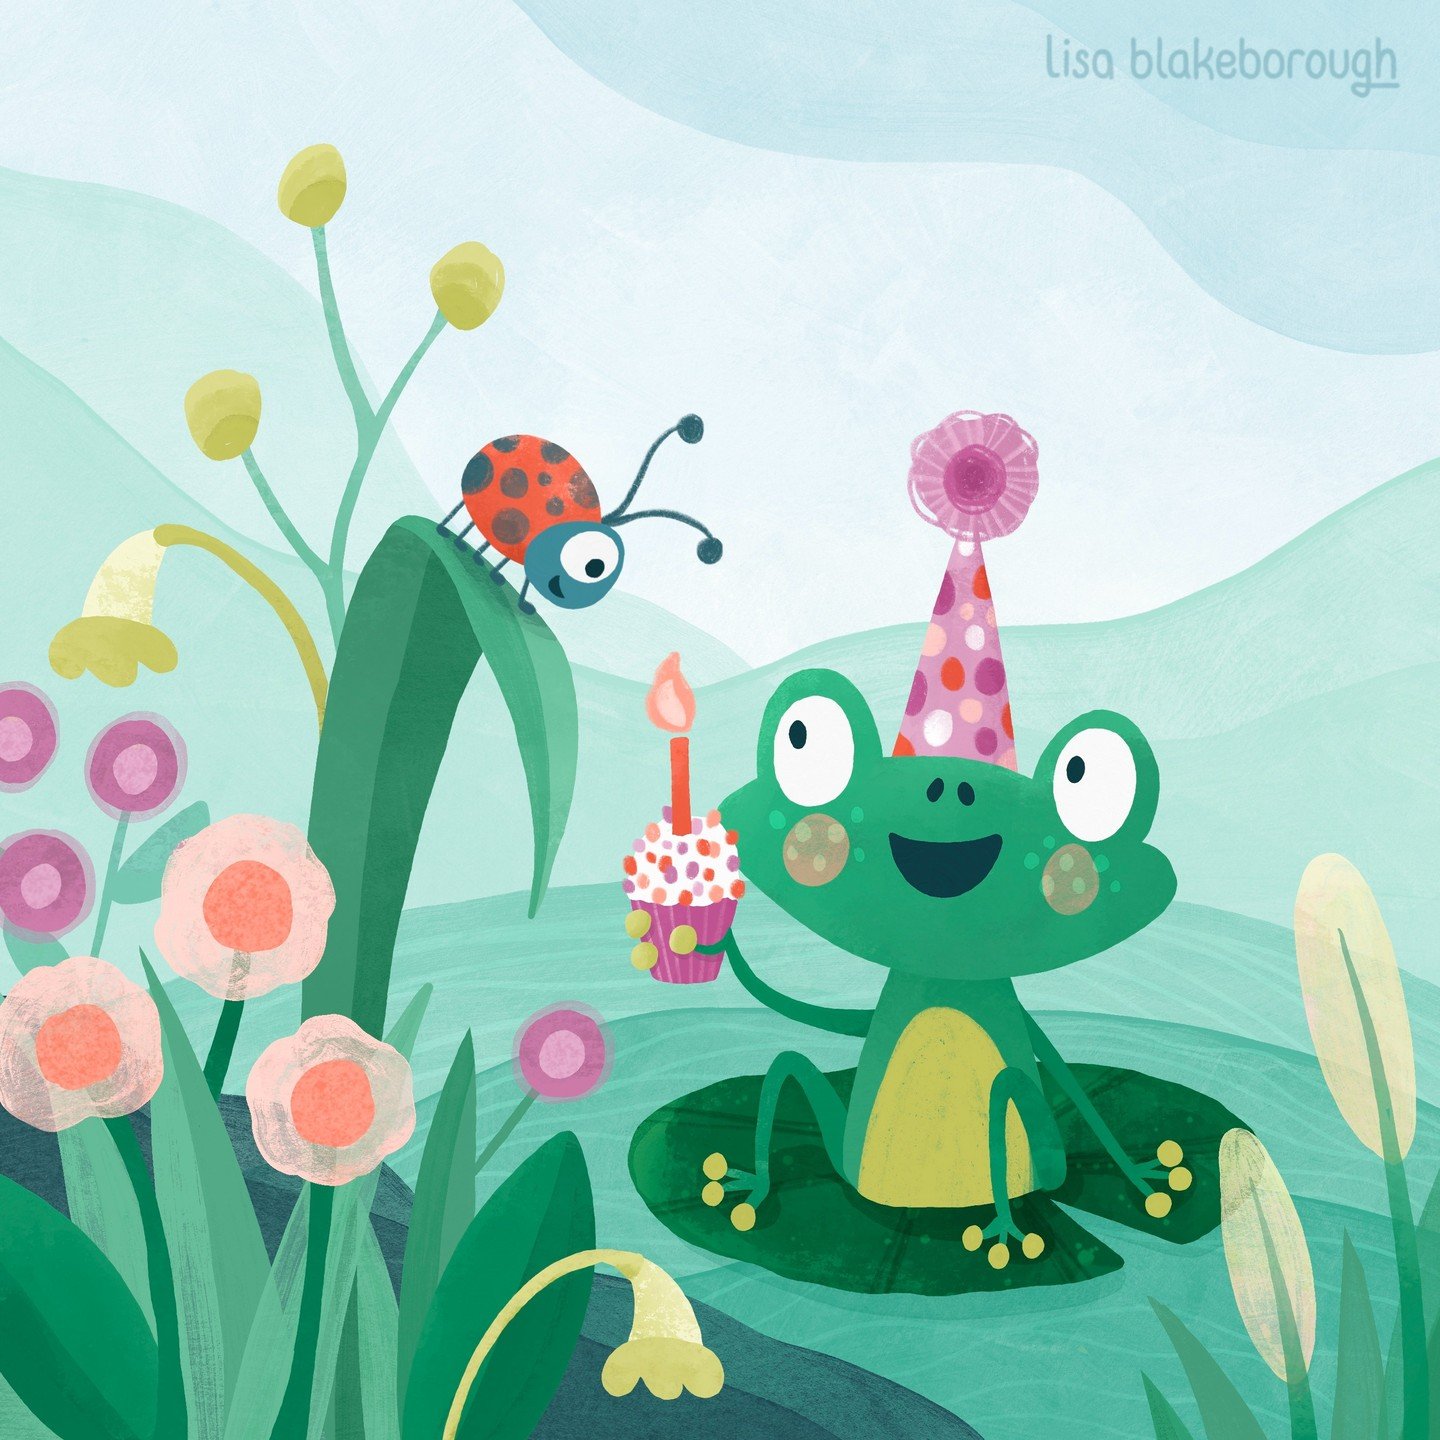 I decided to go with a birthday theme for this one since today's my birthday 😊🌹
This little frog character was also inspired by this week's #MATSprep assignment -- a great warm up for the @makeartthatsells Illustrating Children's Books course start